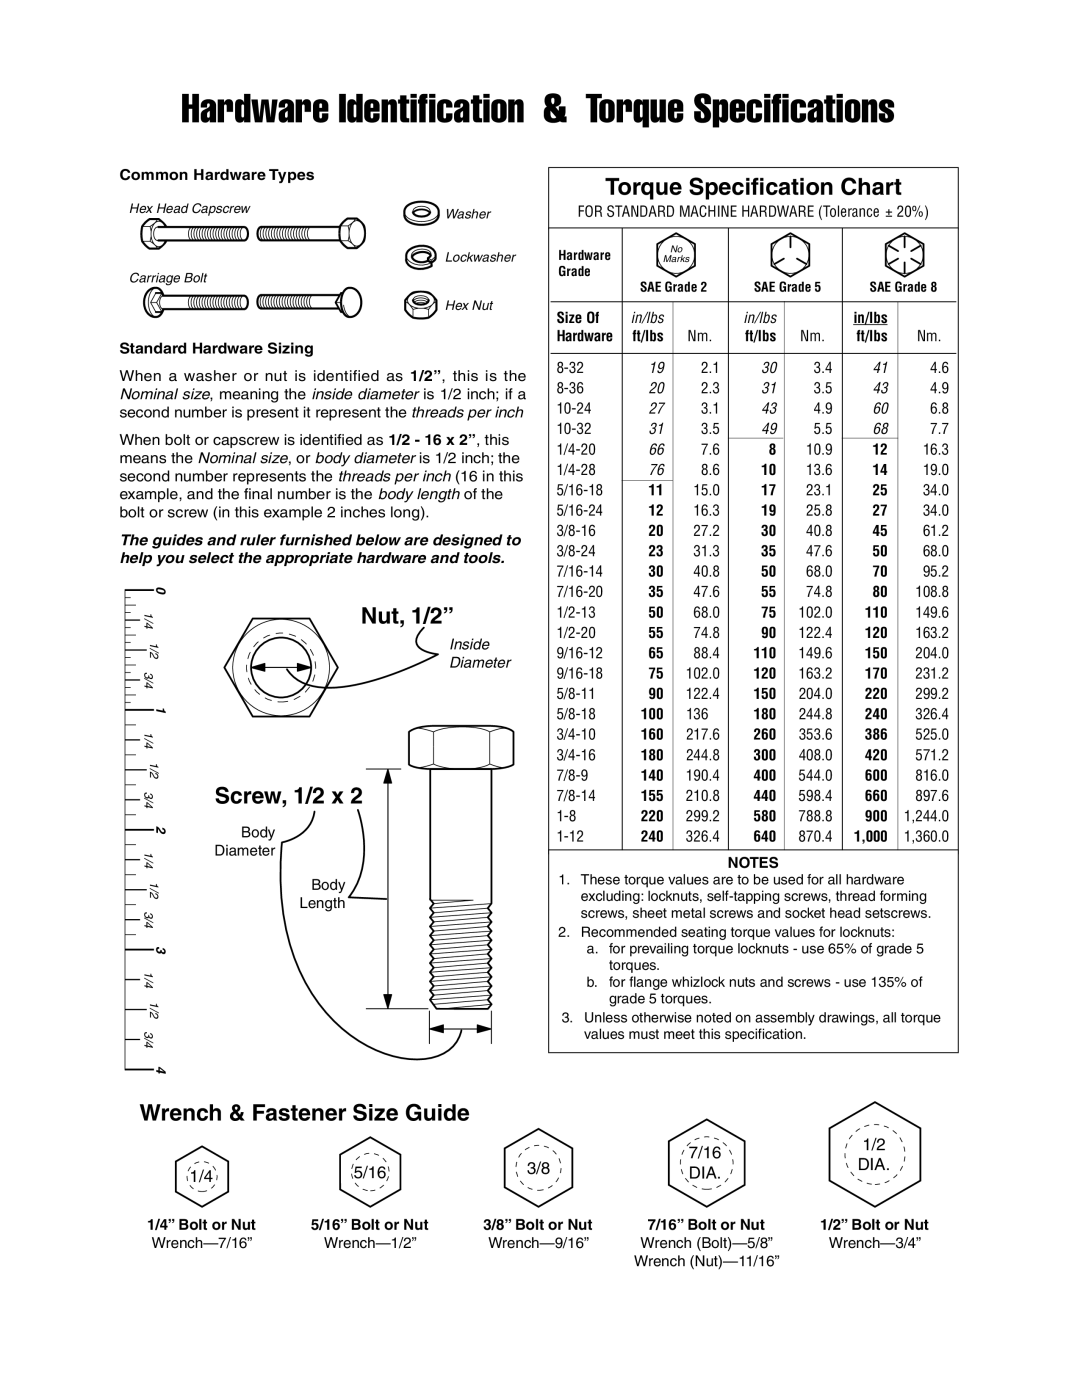 Snapper 4531 Wrench & Fastener Size Guide, Hardware Identification & Torque Specifications, Torque Specification Chart 